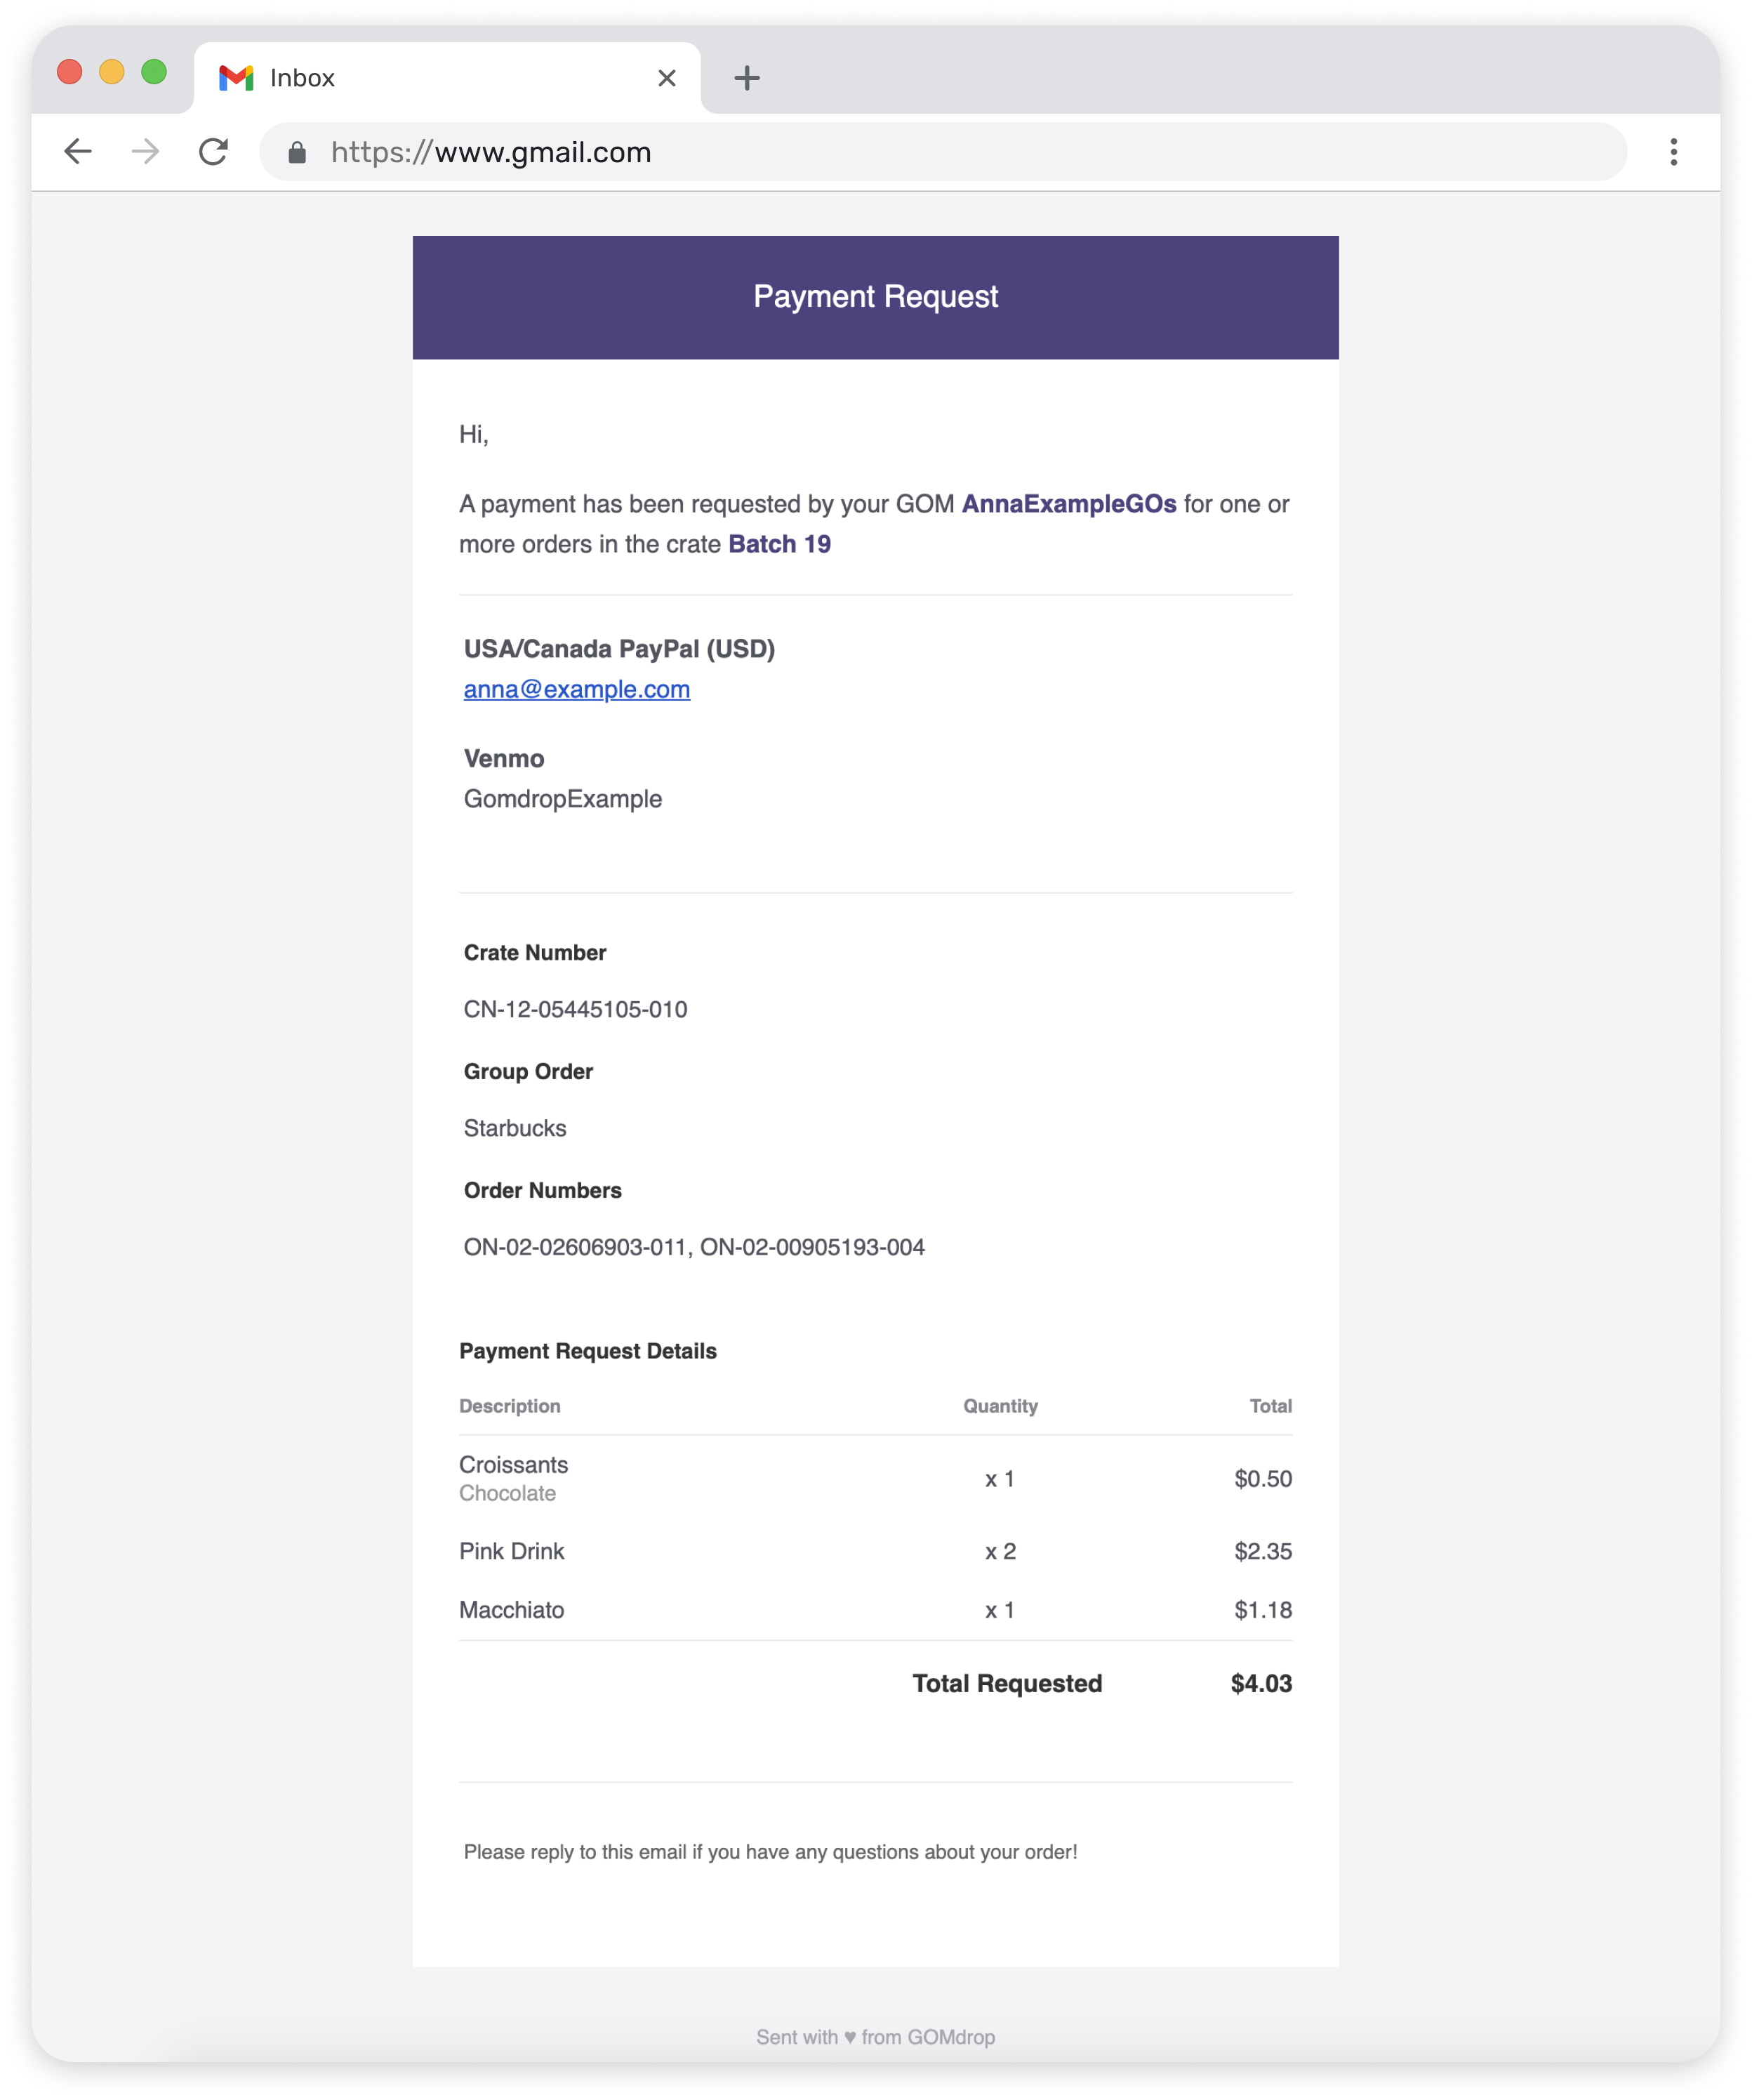 Preview of the payment request email